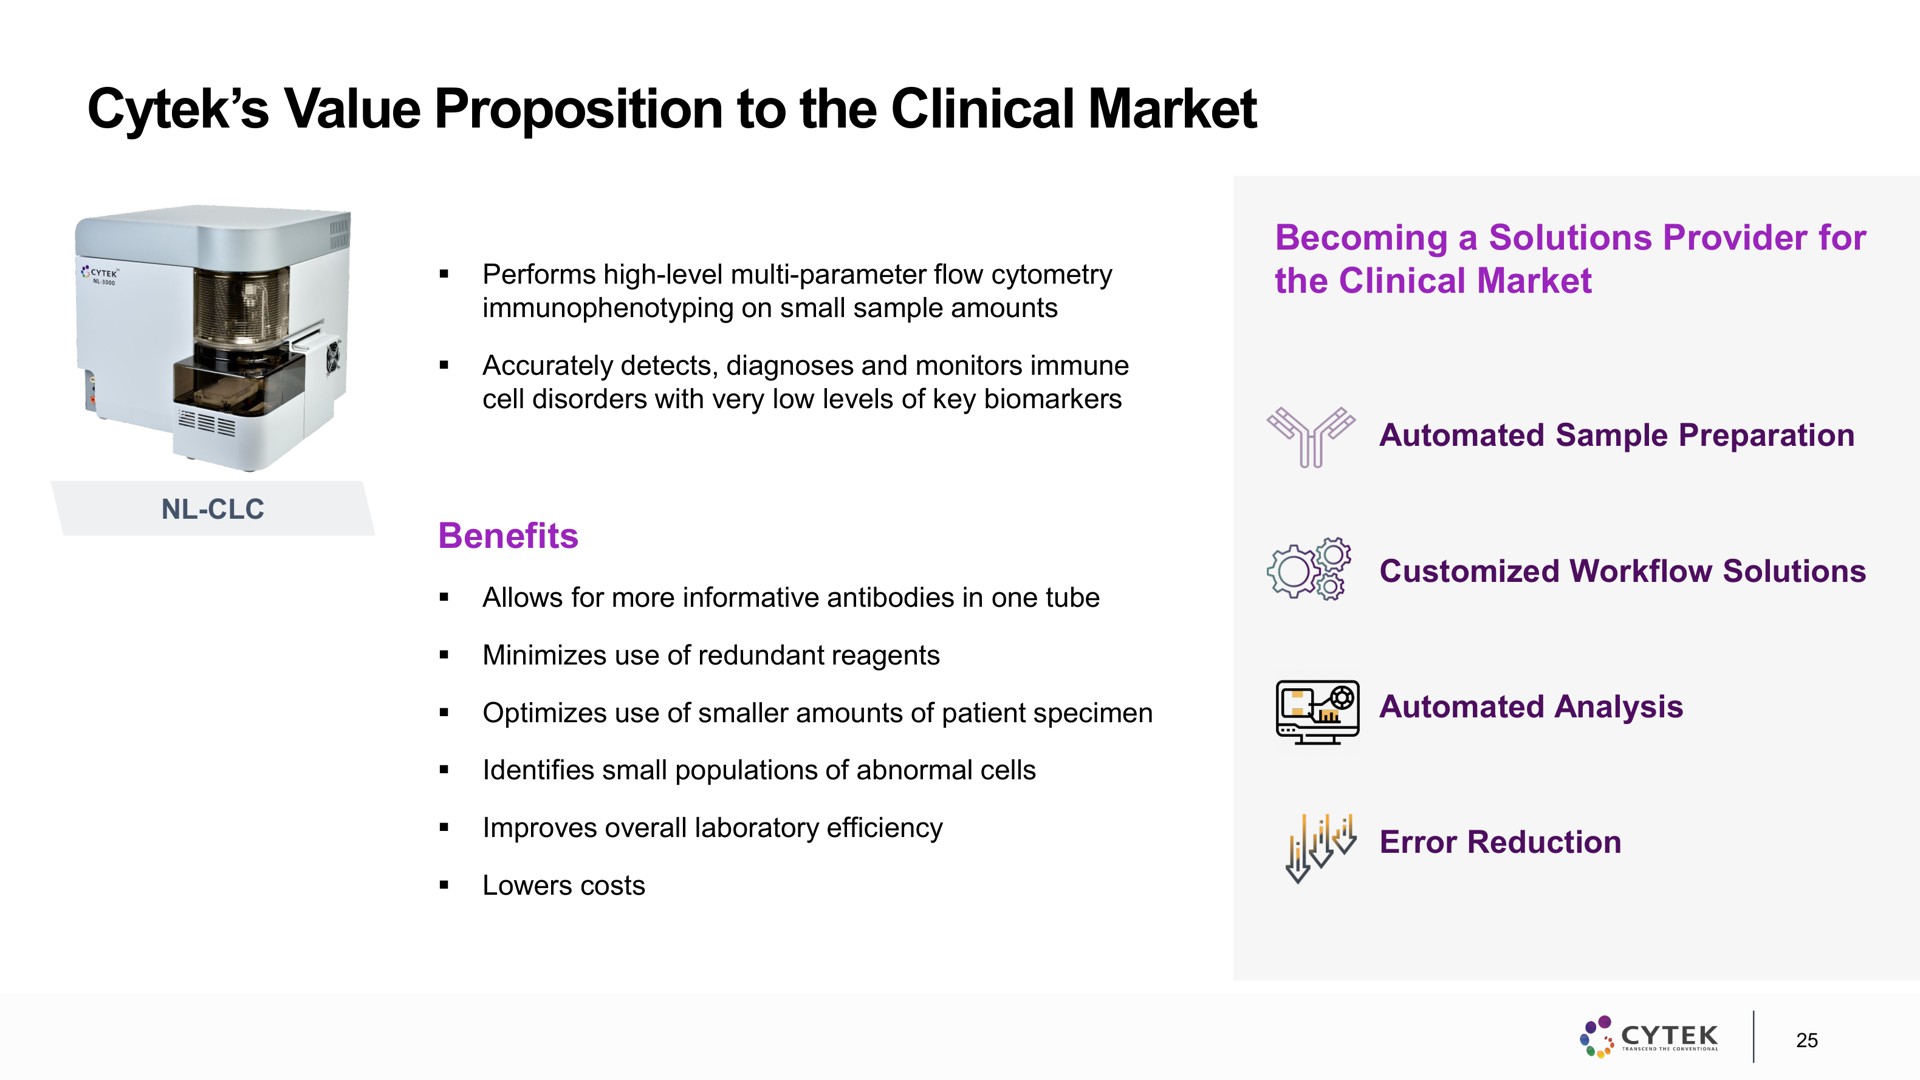 value proposition to the clinical market | Cytek